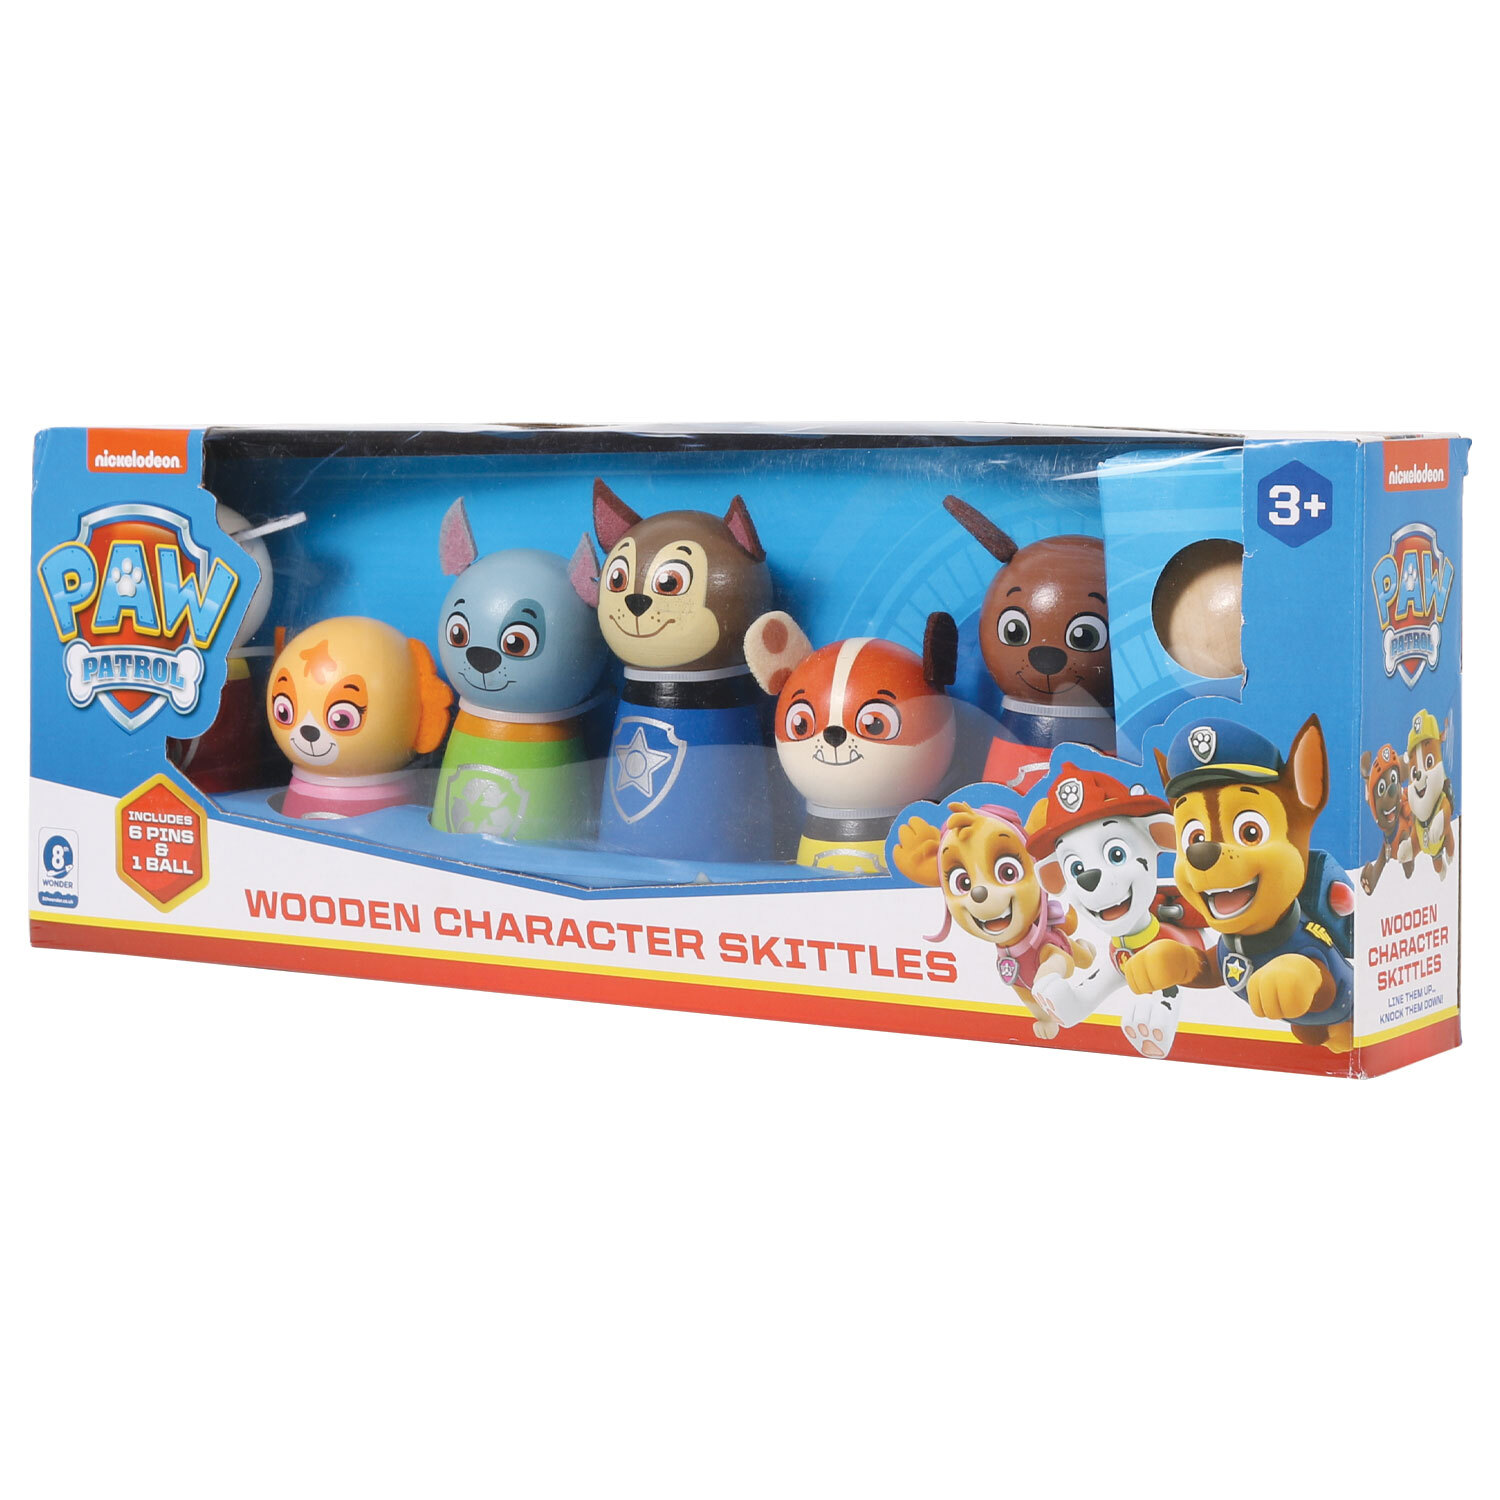 Paw Patrol Wooden Character Skittles Image 2